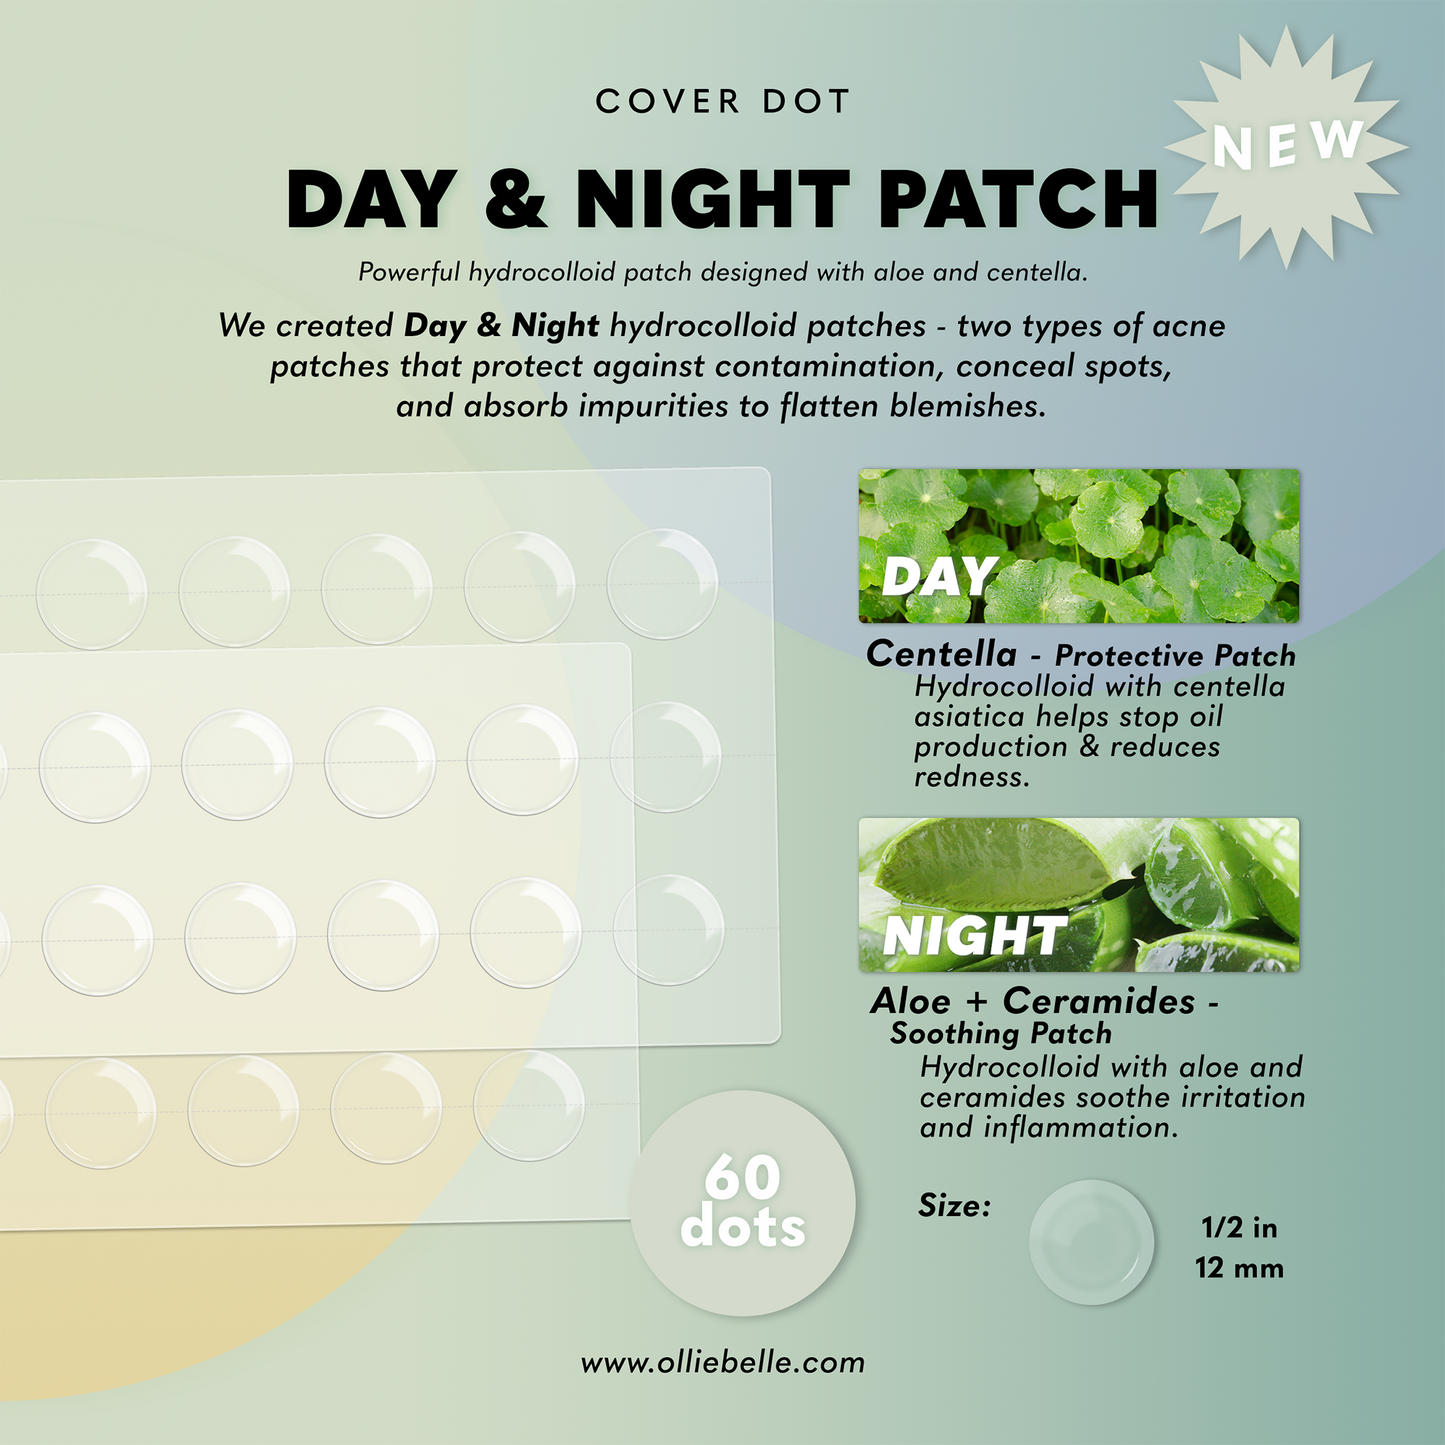 Day & Night - Hydrocolloid Patch Duo - Heal Spots & Stop Redness